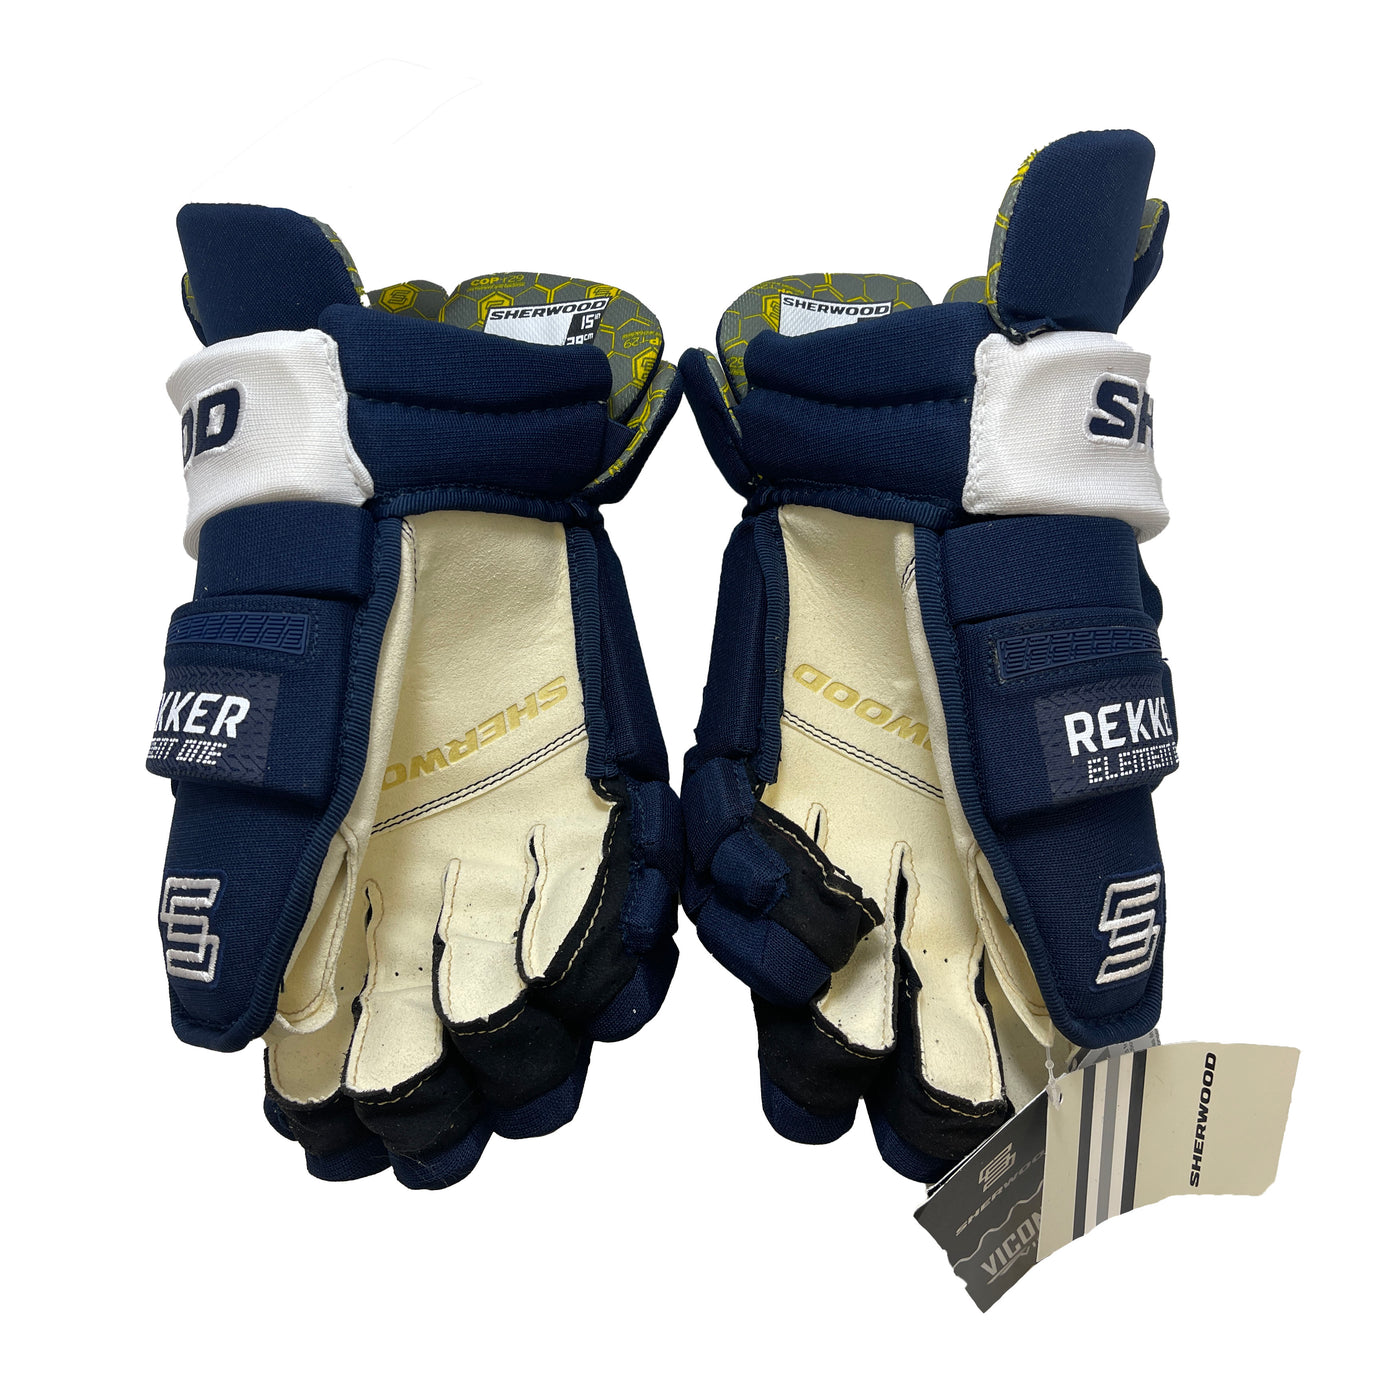 Sherwood Rekker Element One Toronto Maple Leafs Arena's 15" Pro Stock Gloves - Nick Ritchie